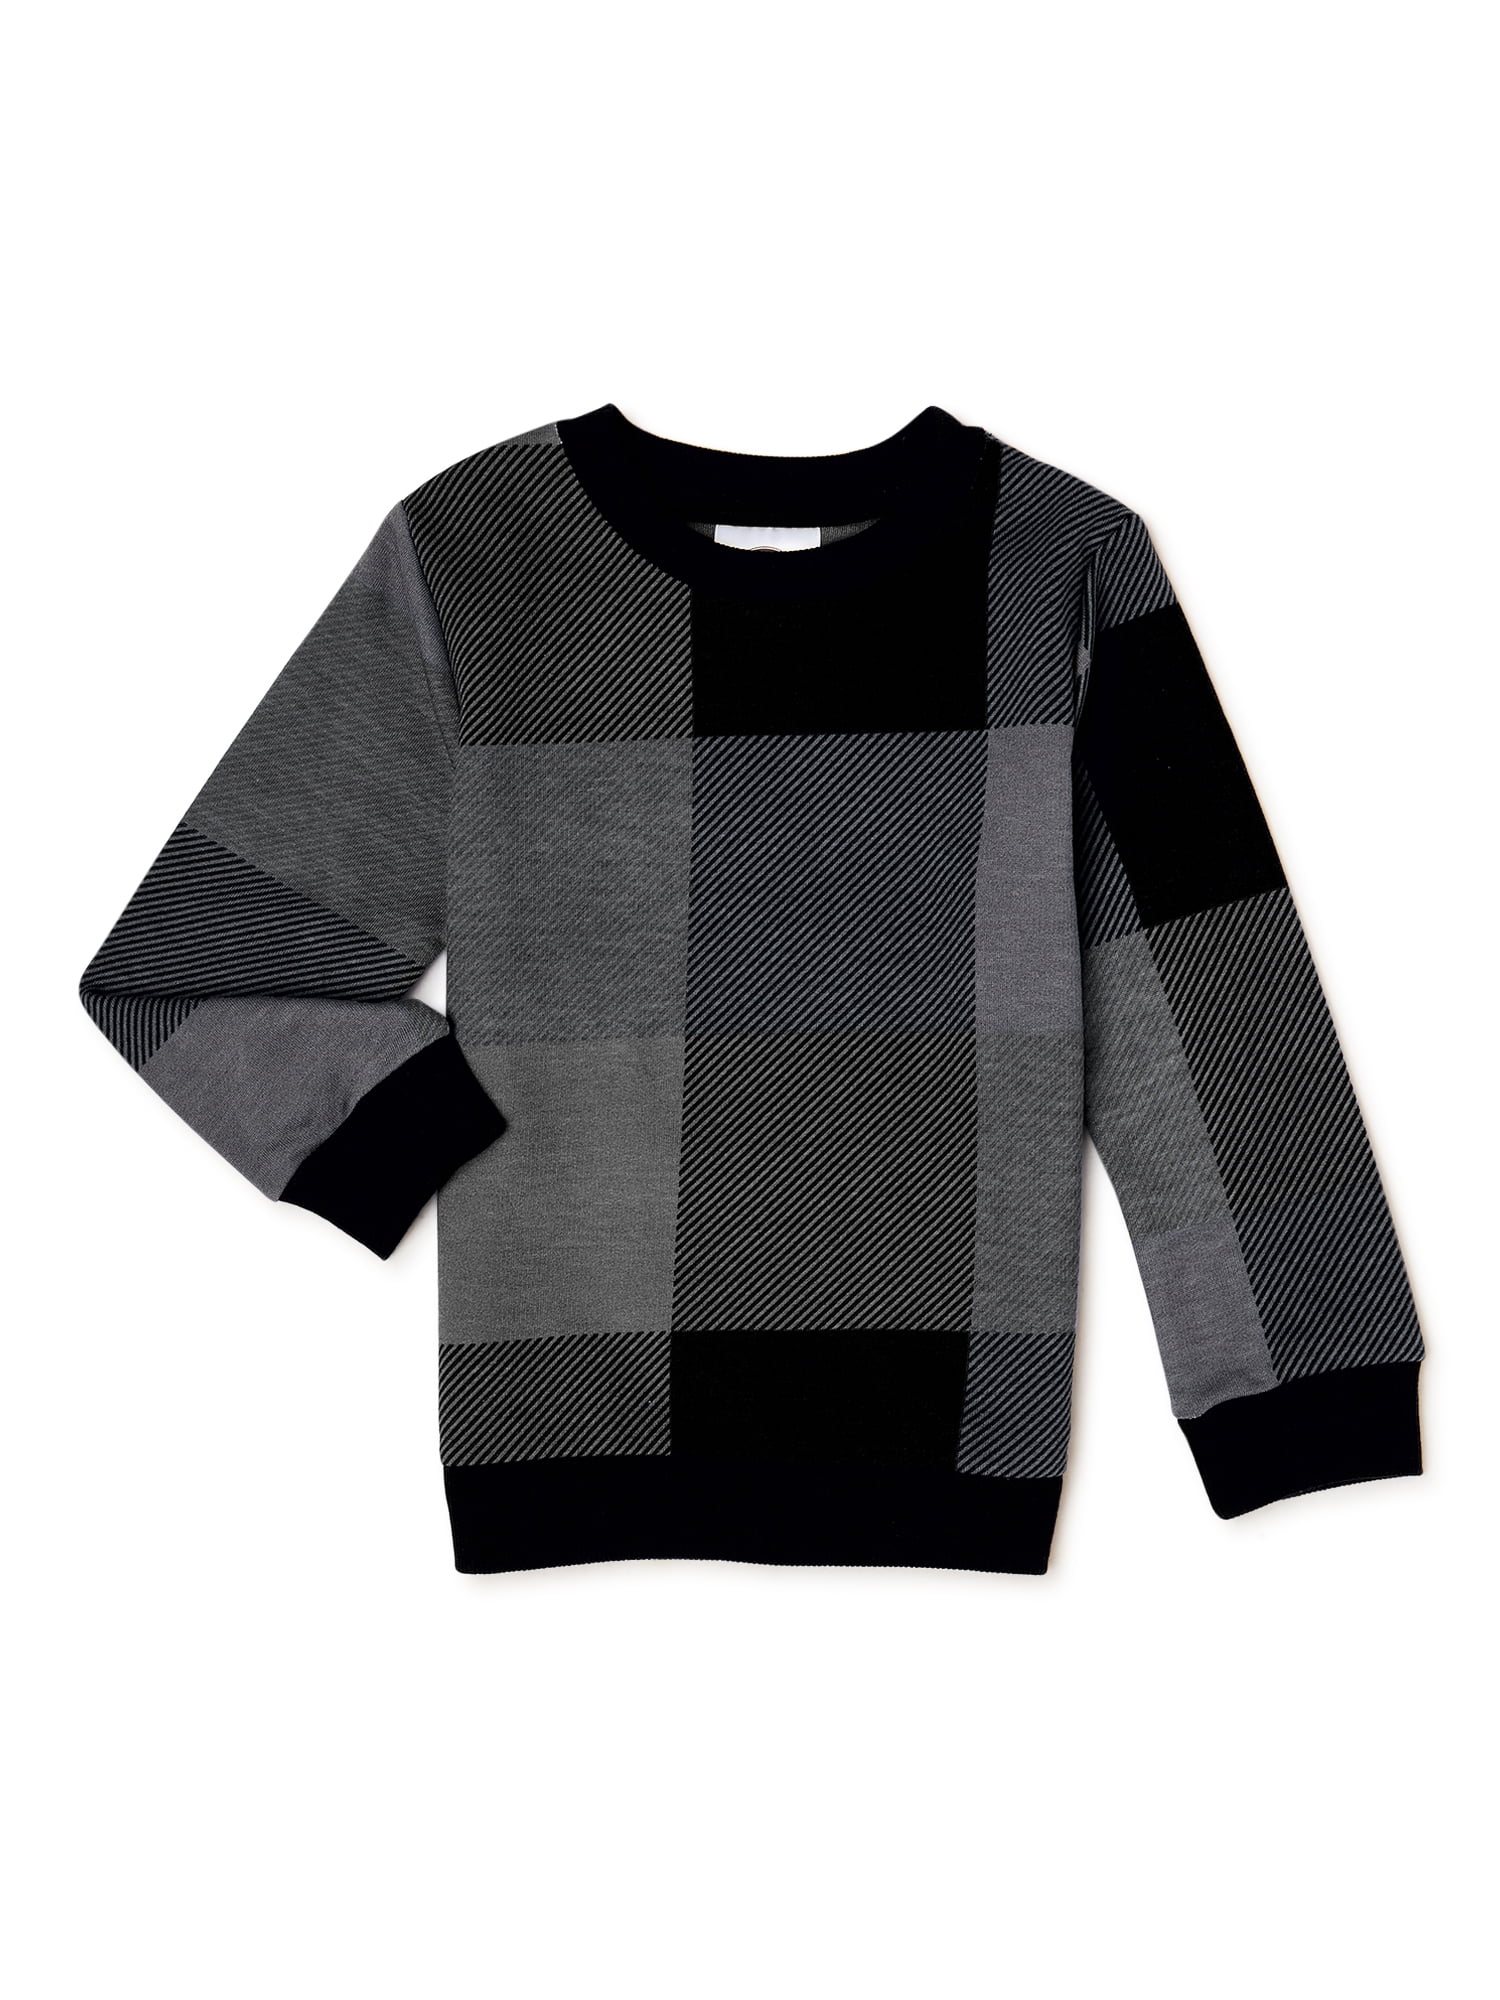 UTH by Roadster Checkered Round Neck Casual Boys Black Sweater